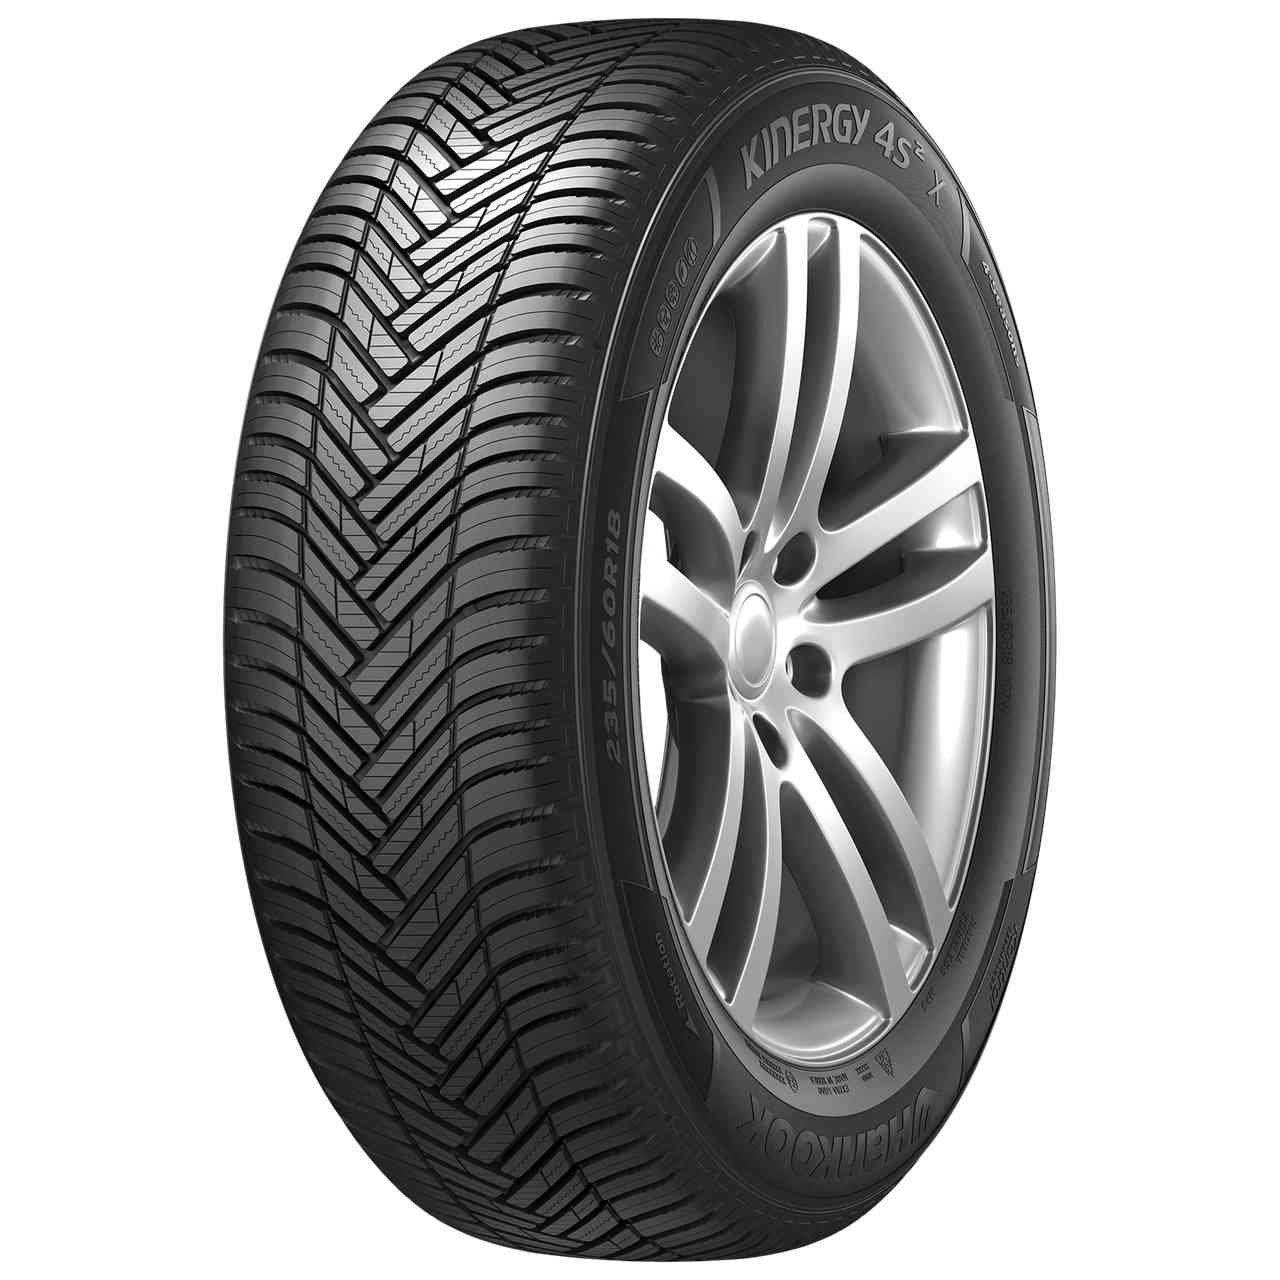 HANKOOK KINERGY 4S 2 X (H750A) 235/65R17 108V BSW XL